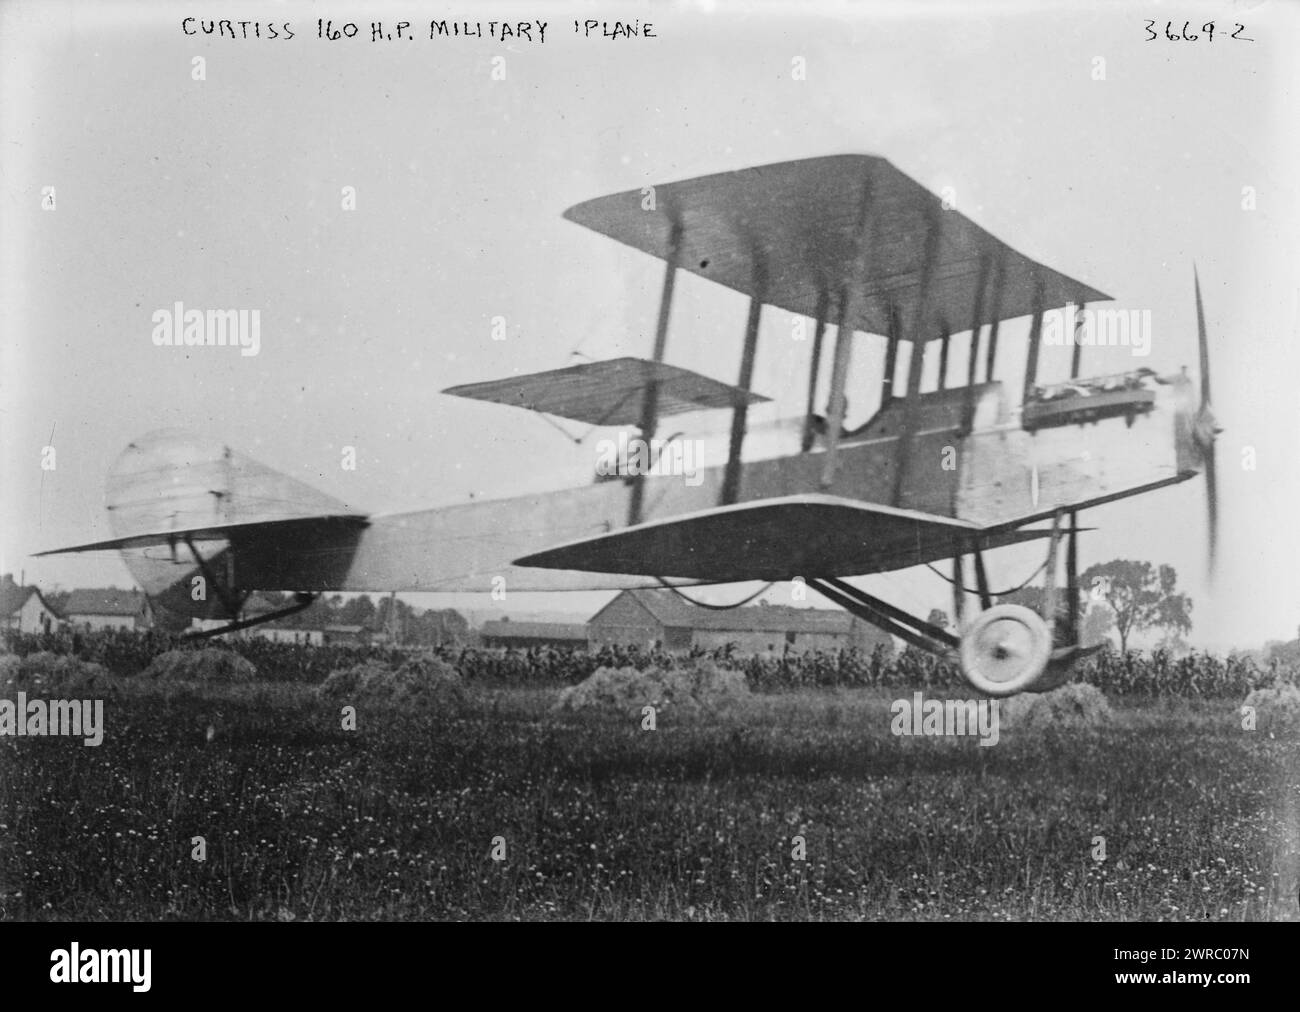 Curtiss 160 H.P. Military Plane, between ca. 1910 and ca. 1915, Glass negatives, 1 negative: glass Stock Photo